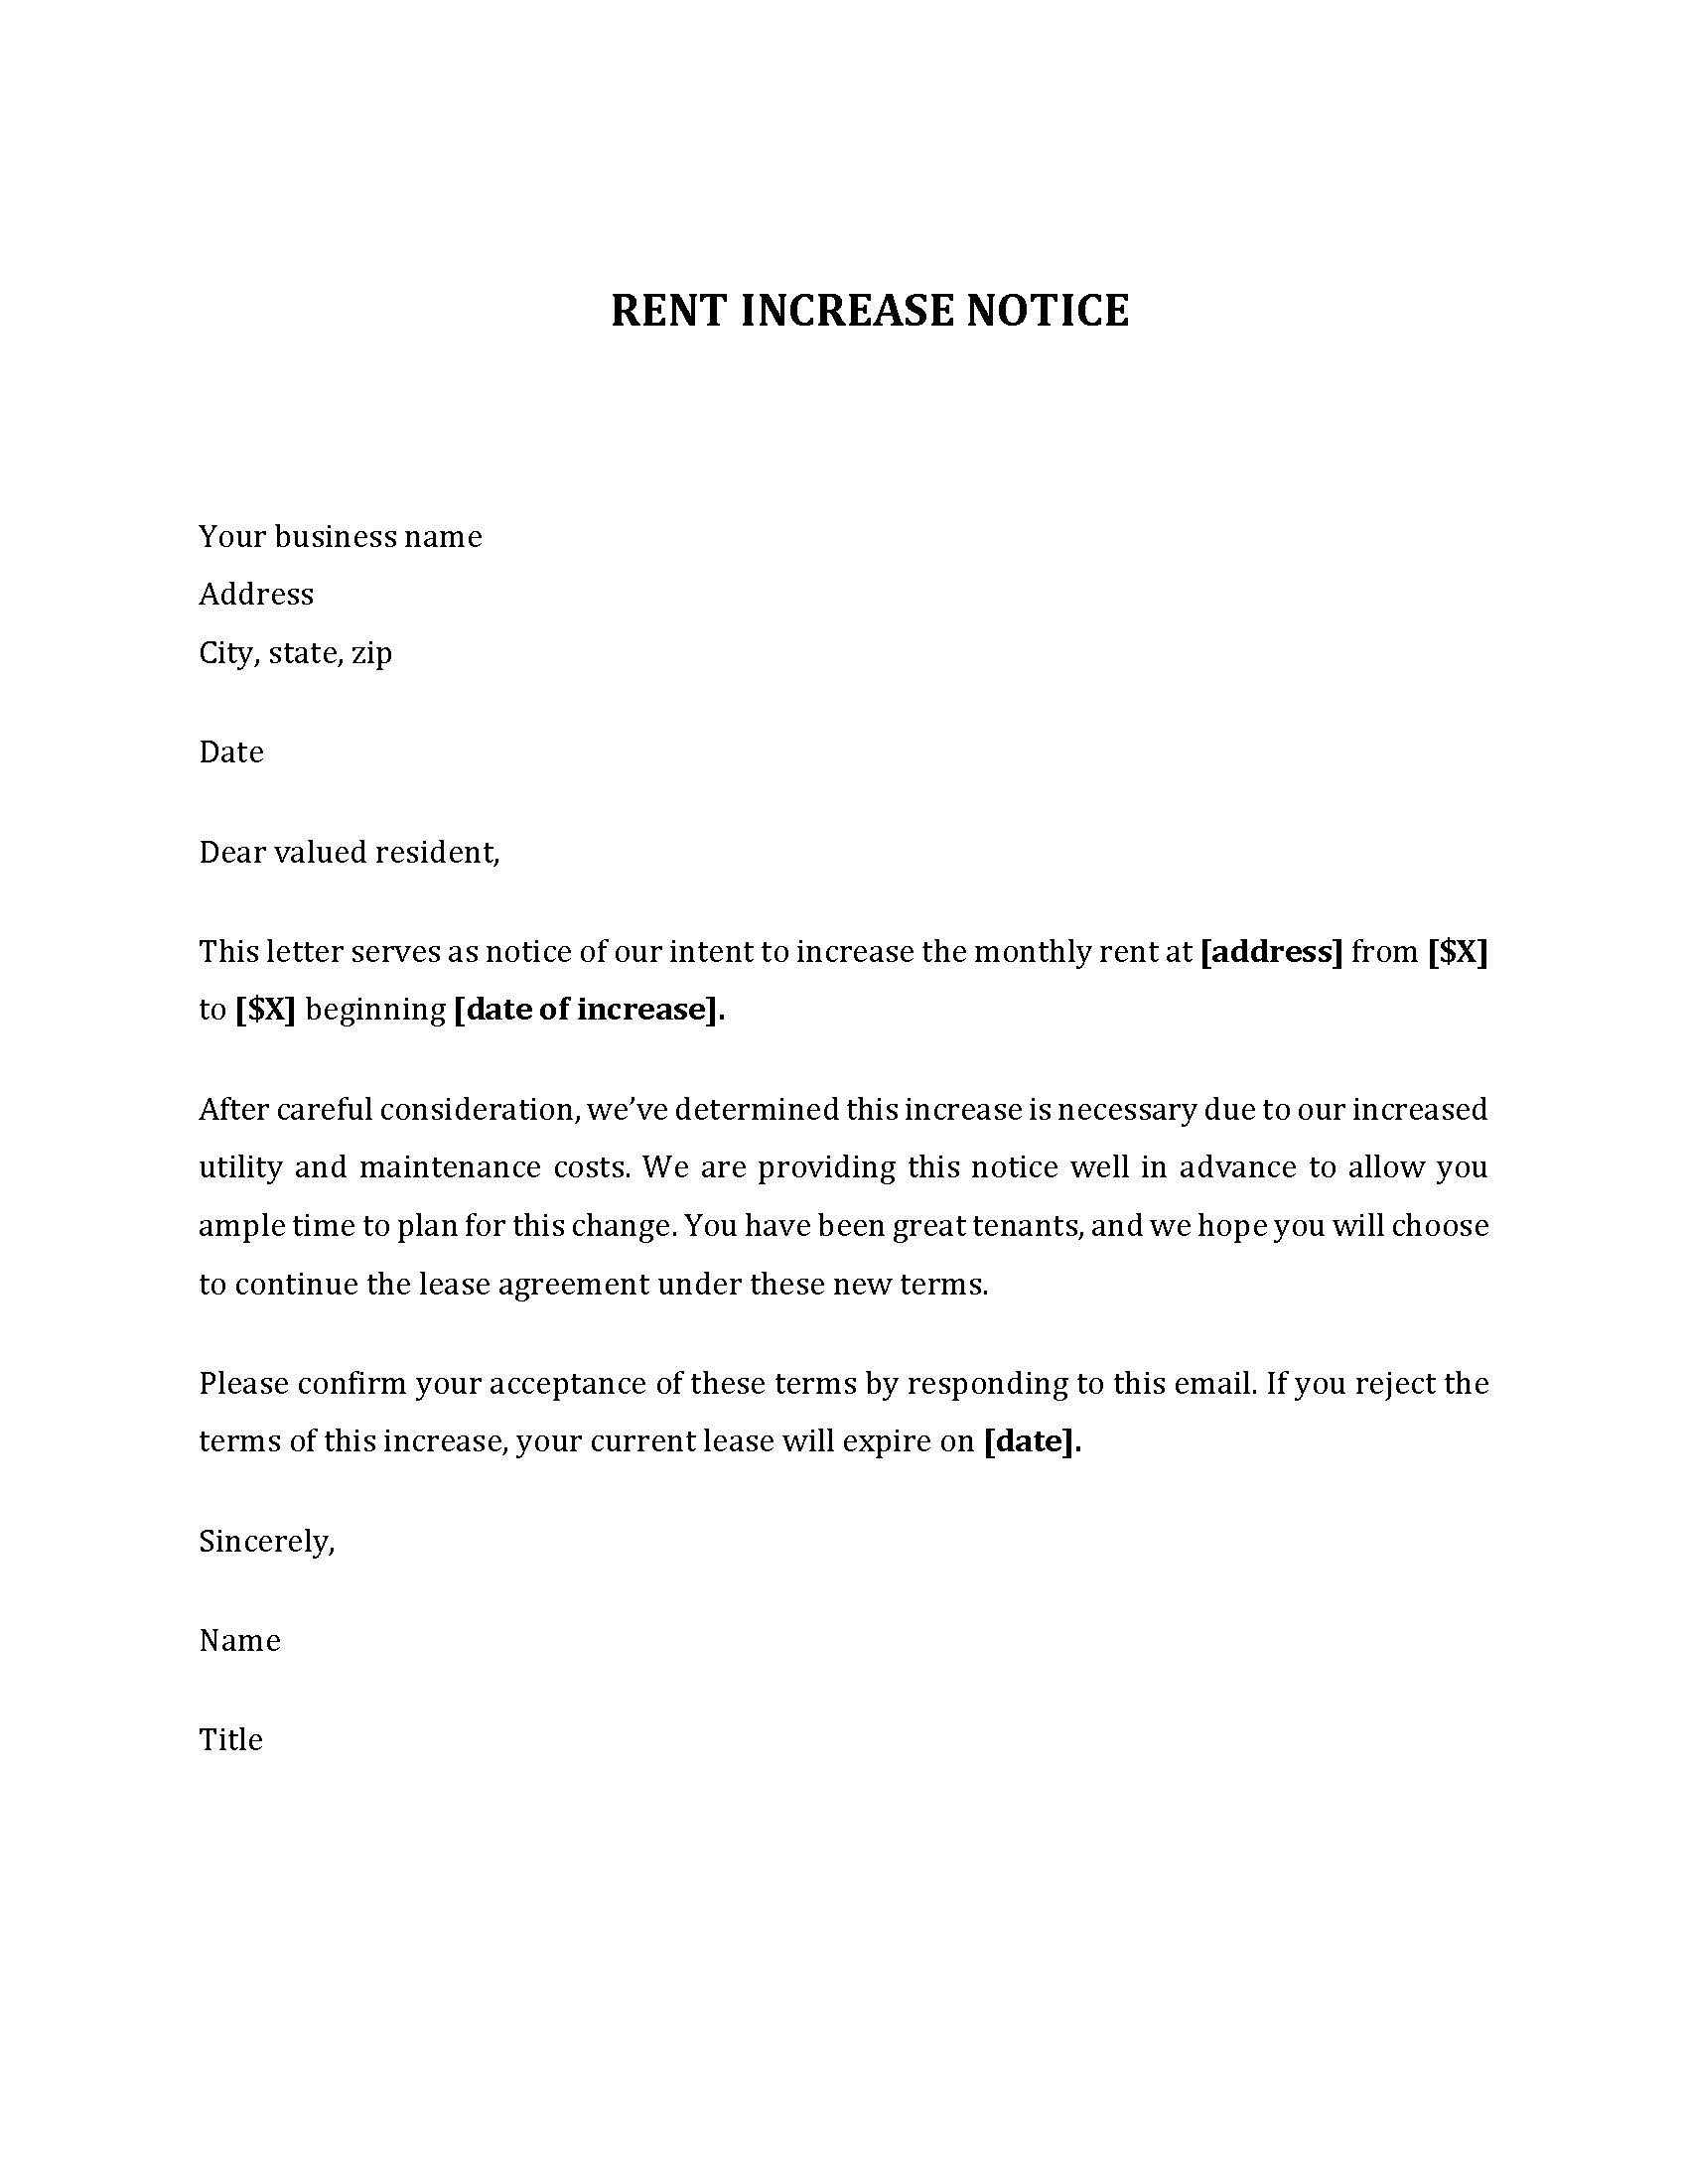 Rent Increase Letter word docs